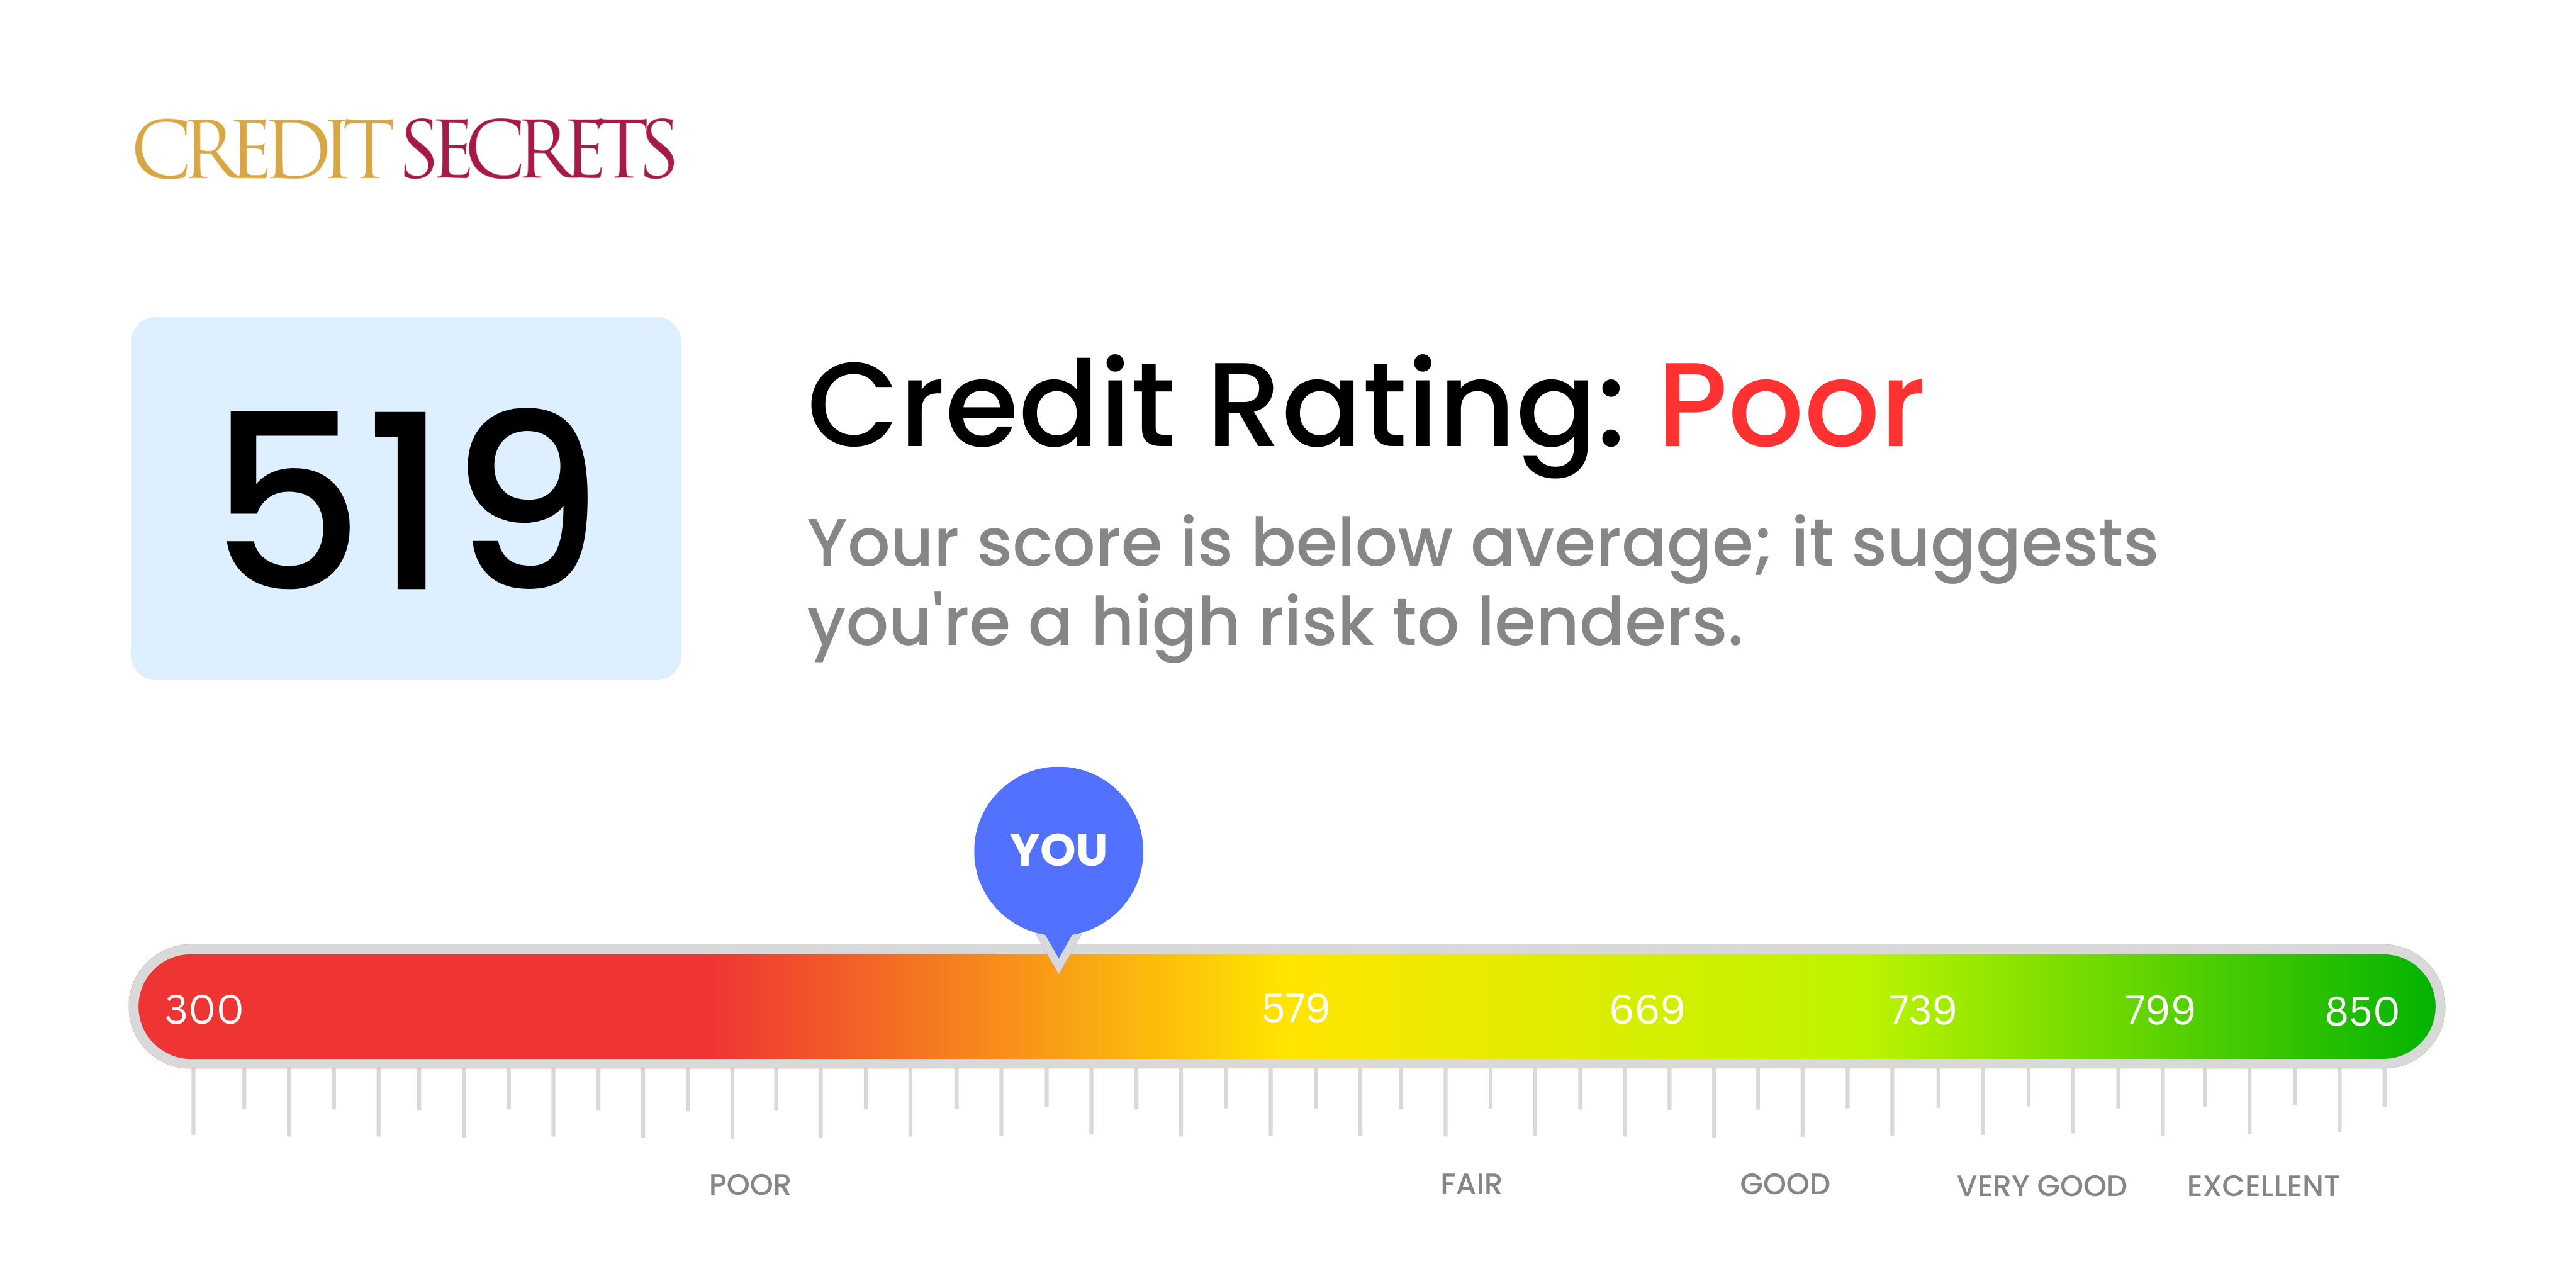 Is 519 a good credit score?